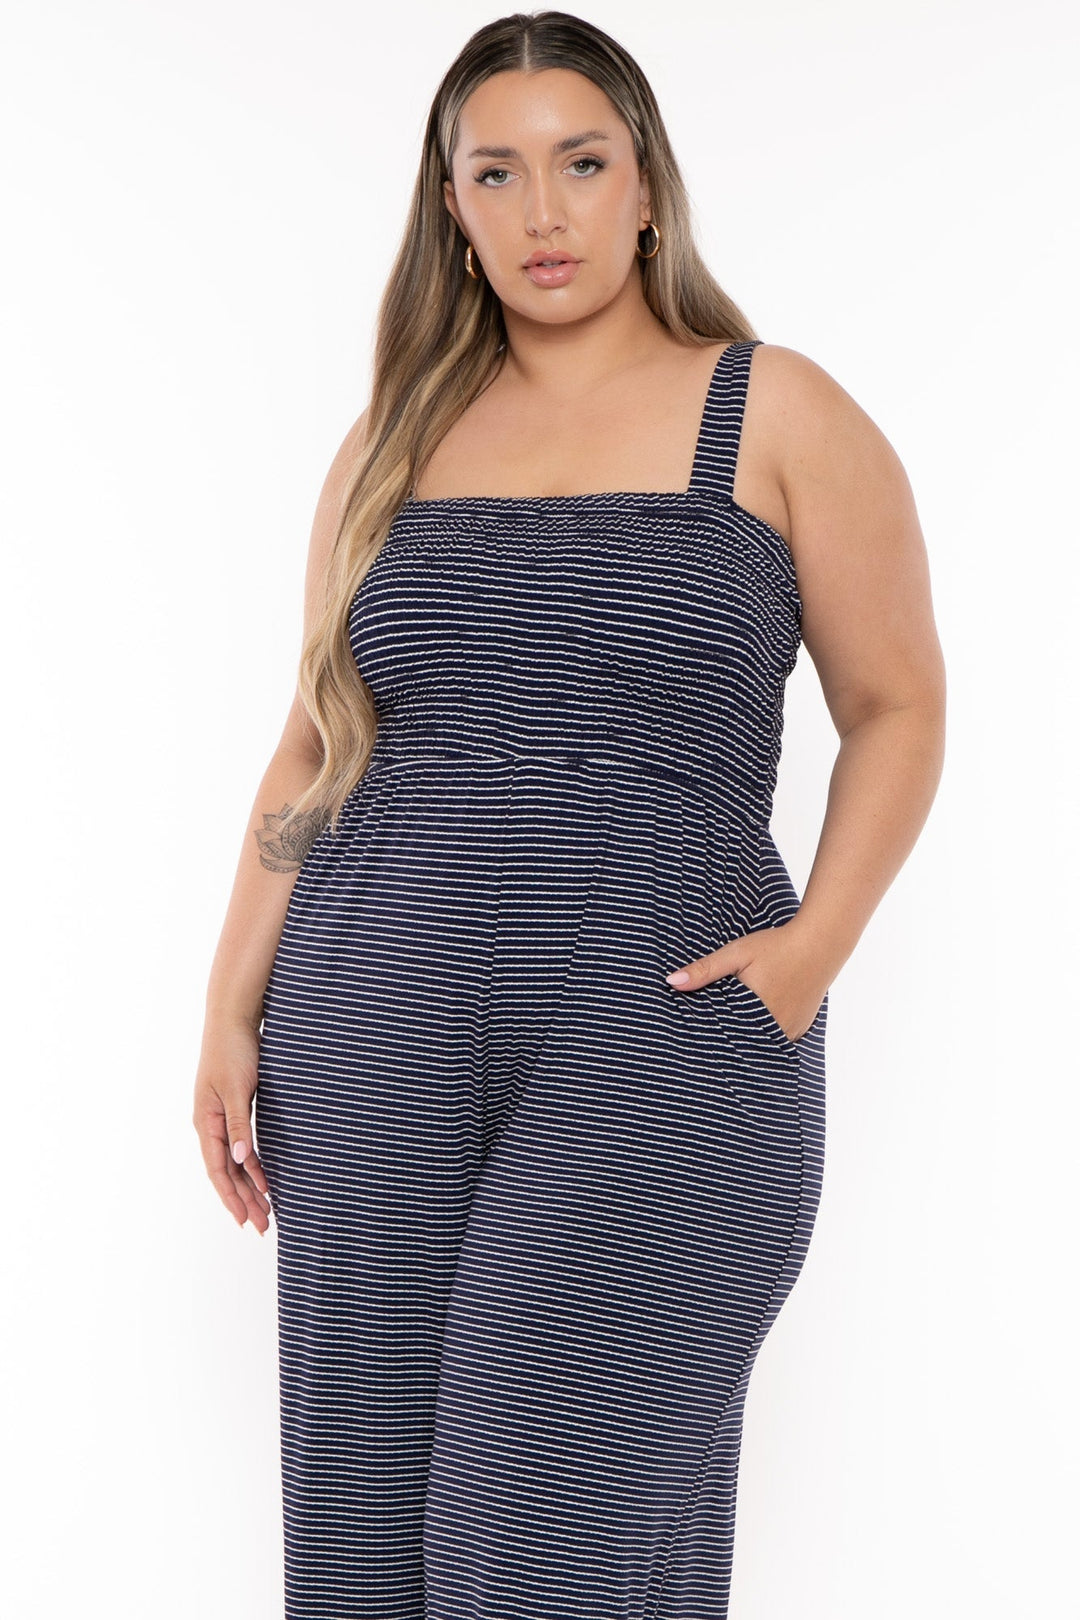 Zenana Jumpsuits and Rompers Plus Size Lia Smocked top stripped Jumpsuit with pockets - Navy